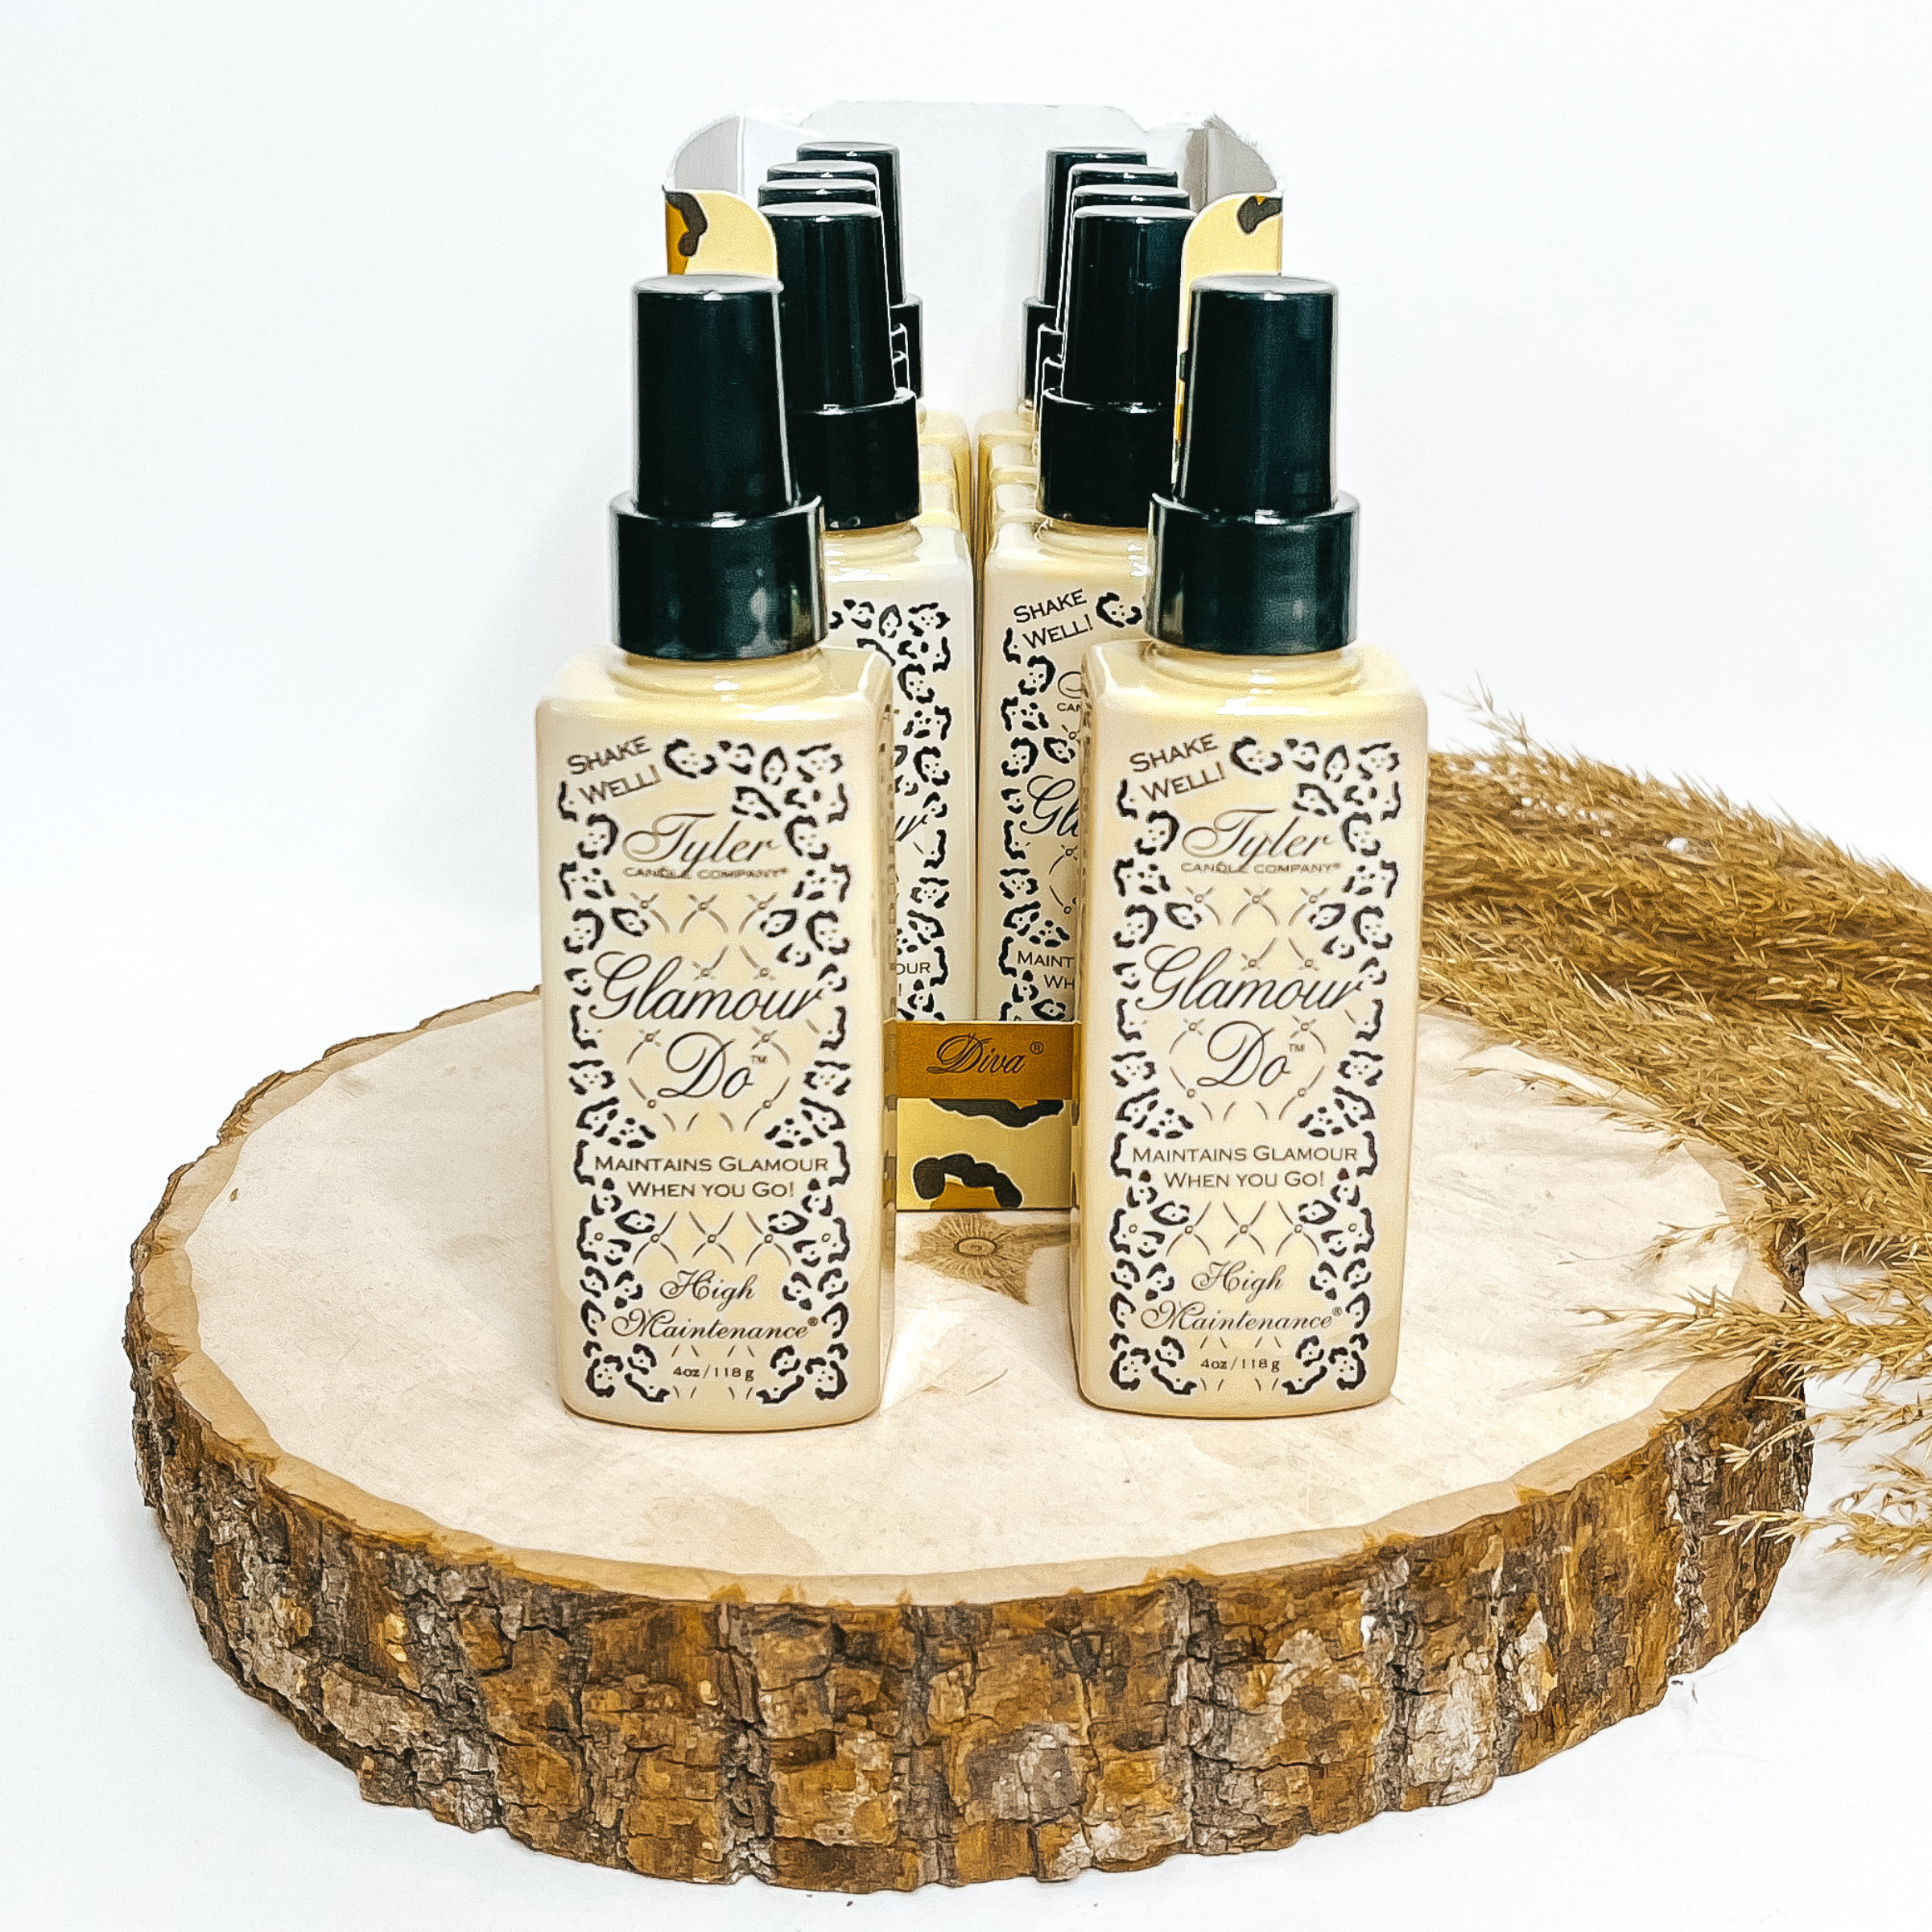 Tyler Candles Glamour Do pictured in Diva and High Maintenance scents in 4 oz size bottles with Tyler logo and leopard print design on the bottle.  Bottles are sitting on top of tree log piece with pampas grass in background.